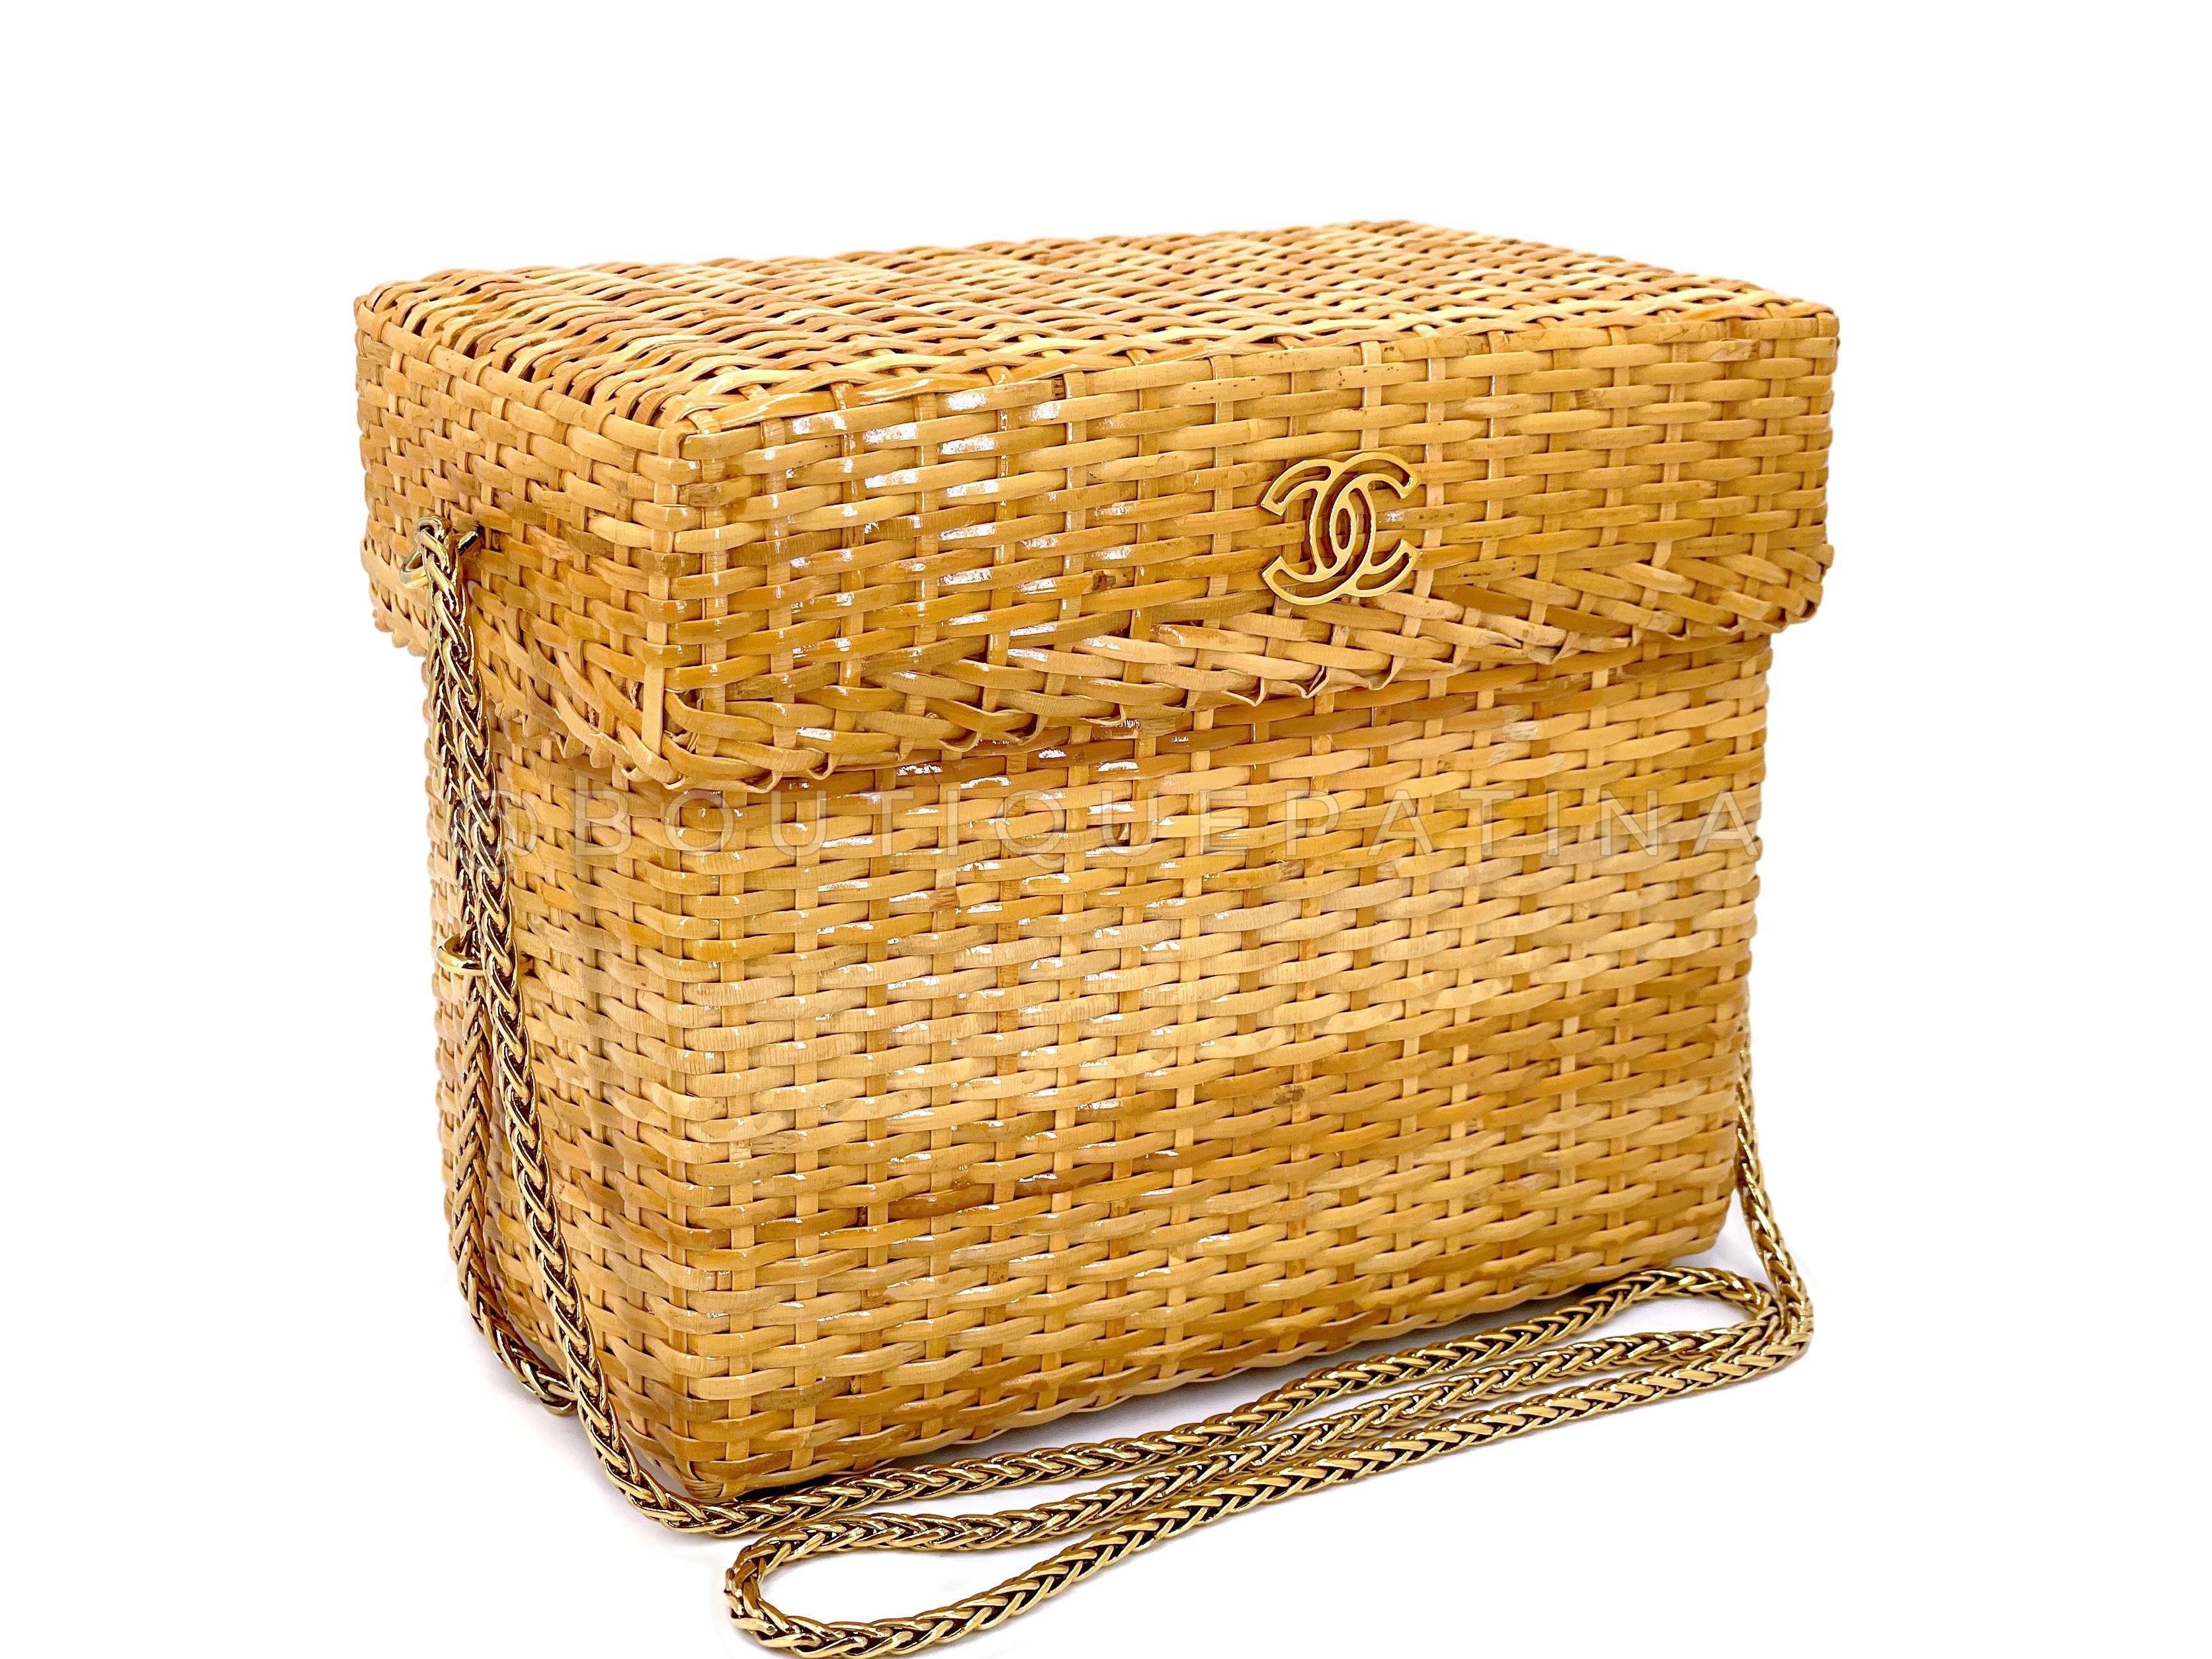 Store item: 67399
This Chanel Vintage Wicker Mini Picnic Basket Rattan Bag w Chain is a whimsical miniature picnic basket style two-piece box-shaped bag with a lid that is removable (but still attached via chain) to a leather-lined interior.

Sleek